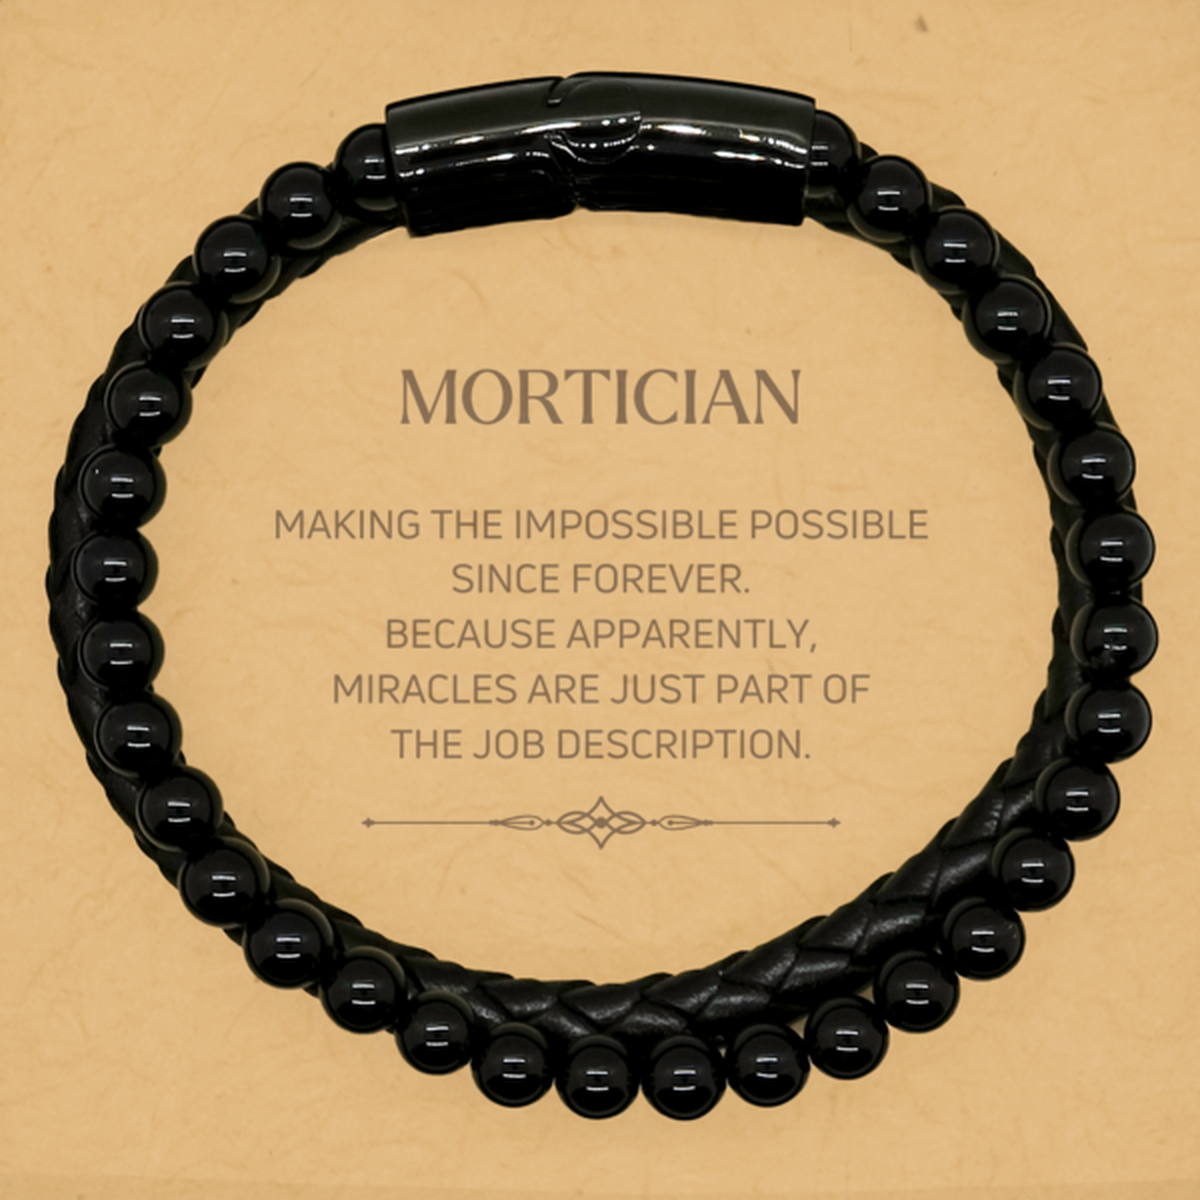 Funny Mortician Gifts, Miracles are just part of the job description, Inspirational Birthday Stone Leather Bracelets For Mortician, Men, Women, Coworkers, Friends, Boss